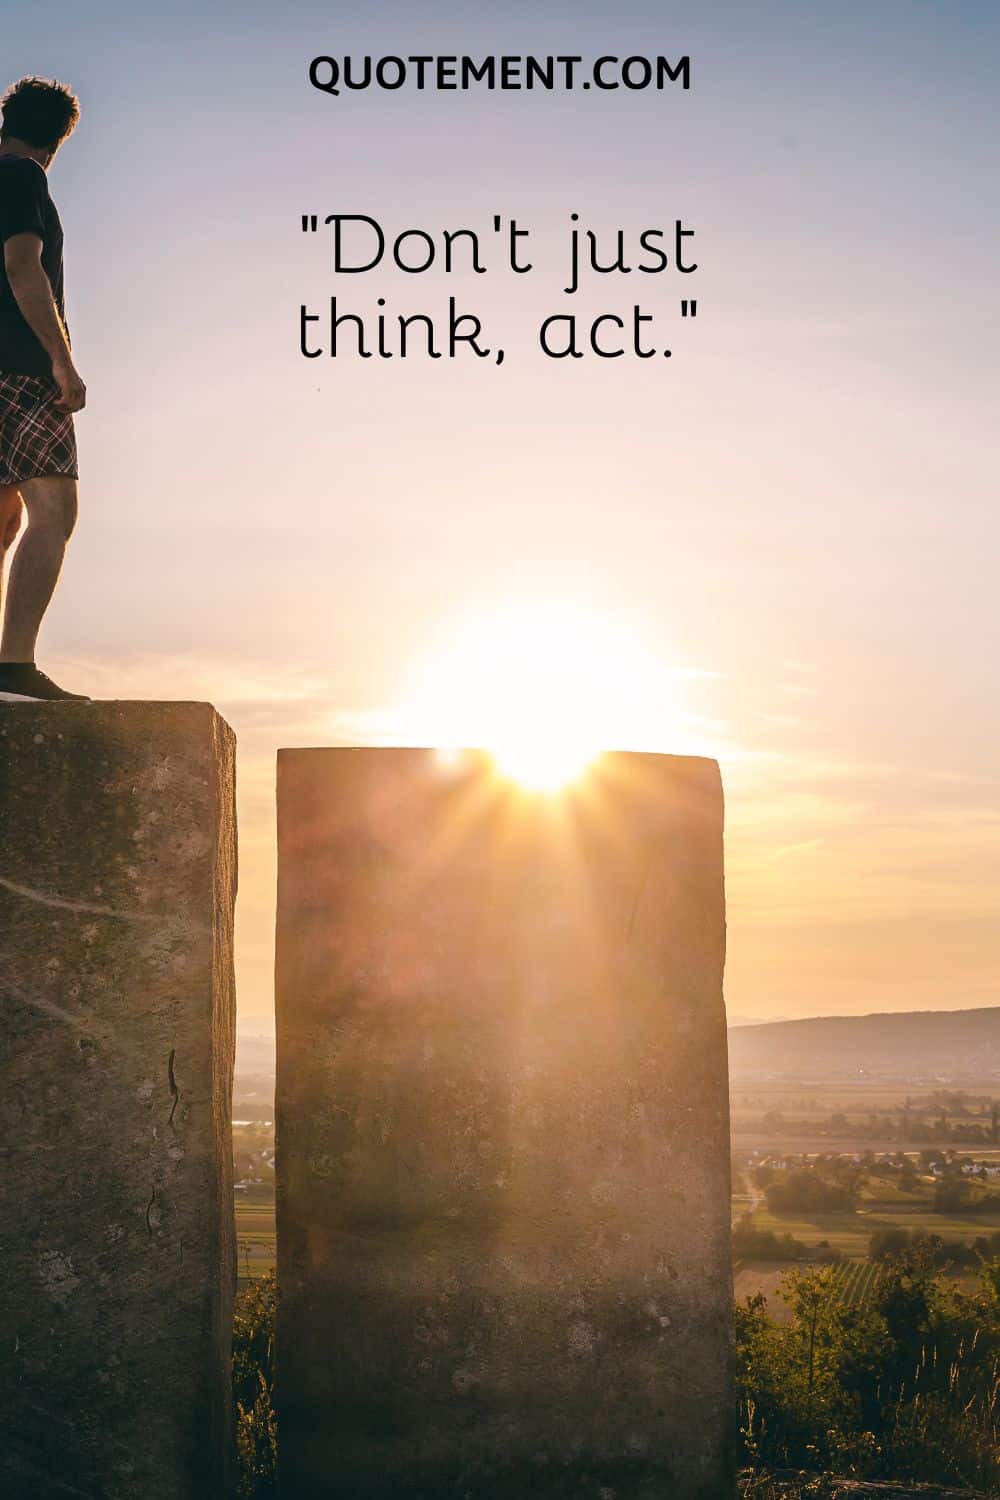 Don’t just think, act.